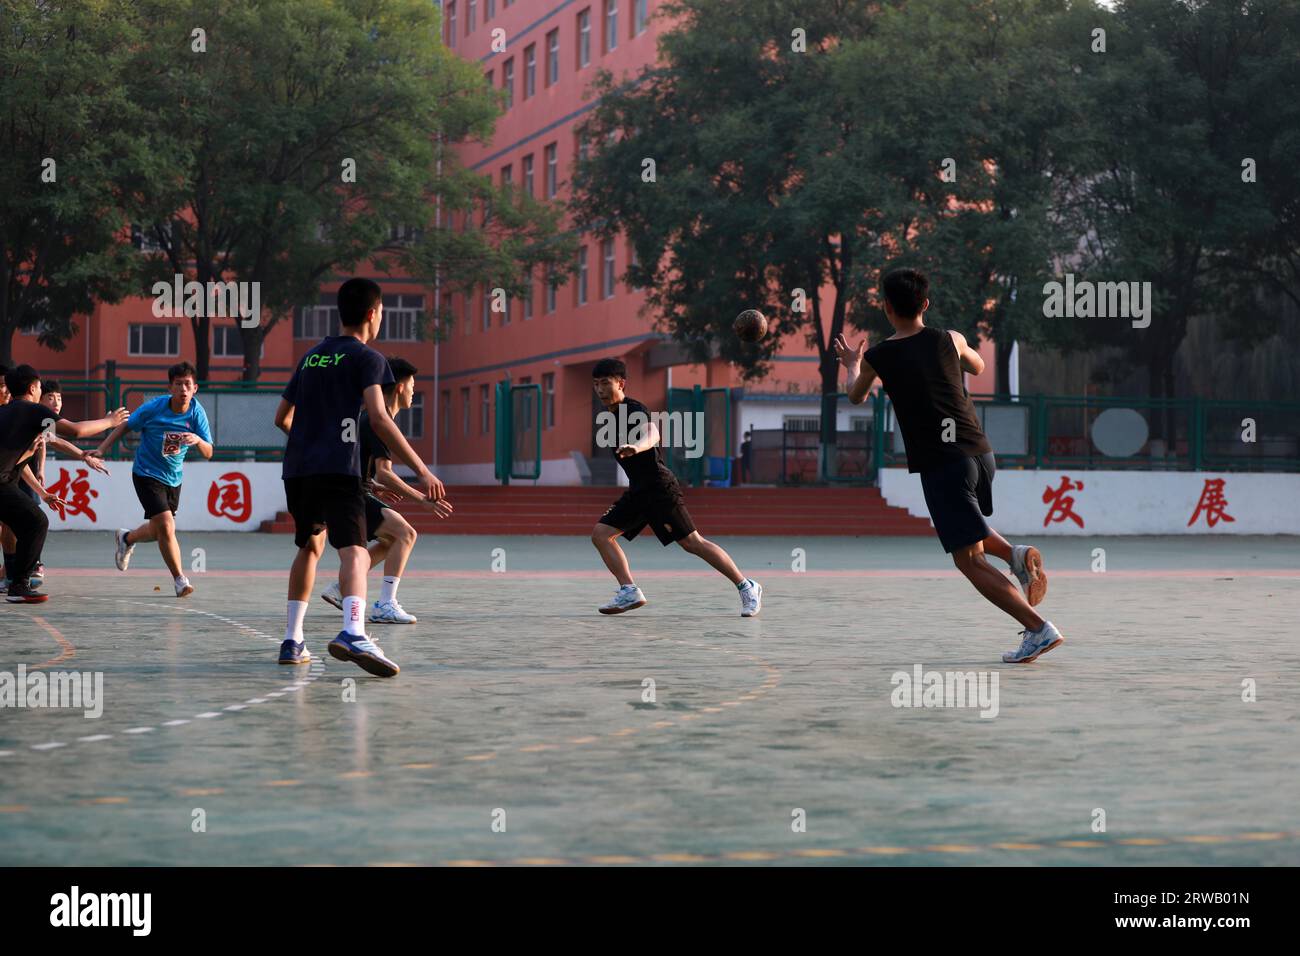 Luannan County, China - September 23, 2019: Handball players of middle school students are training, Luannan County, Hebei Province, China Stock Photo